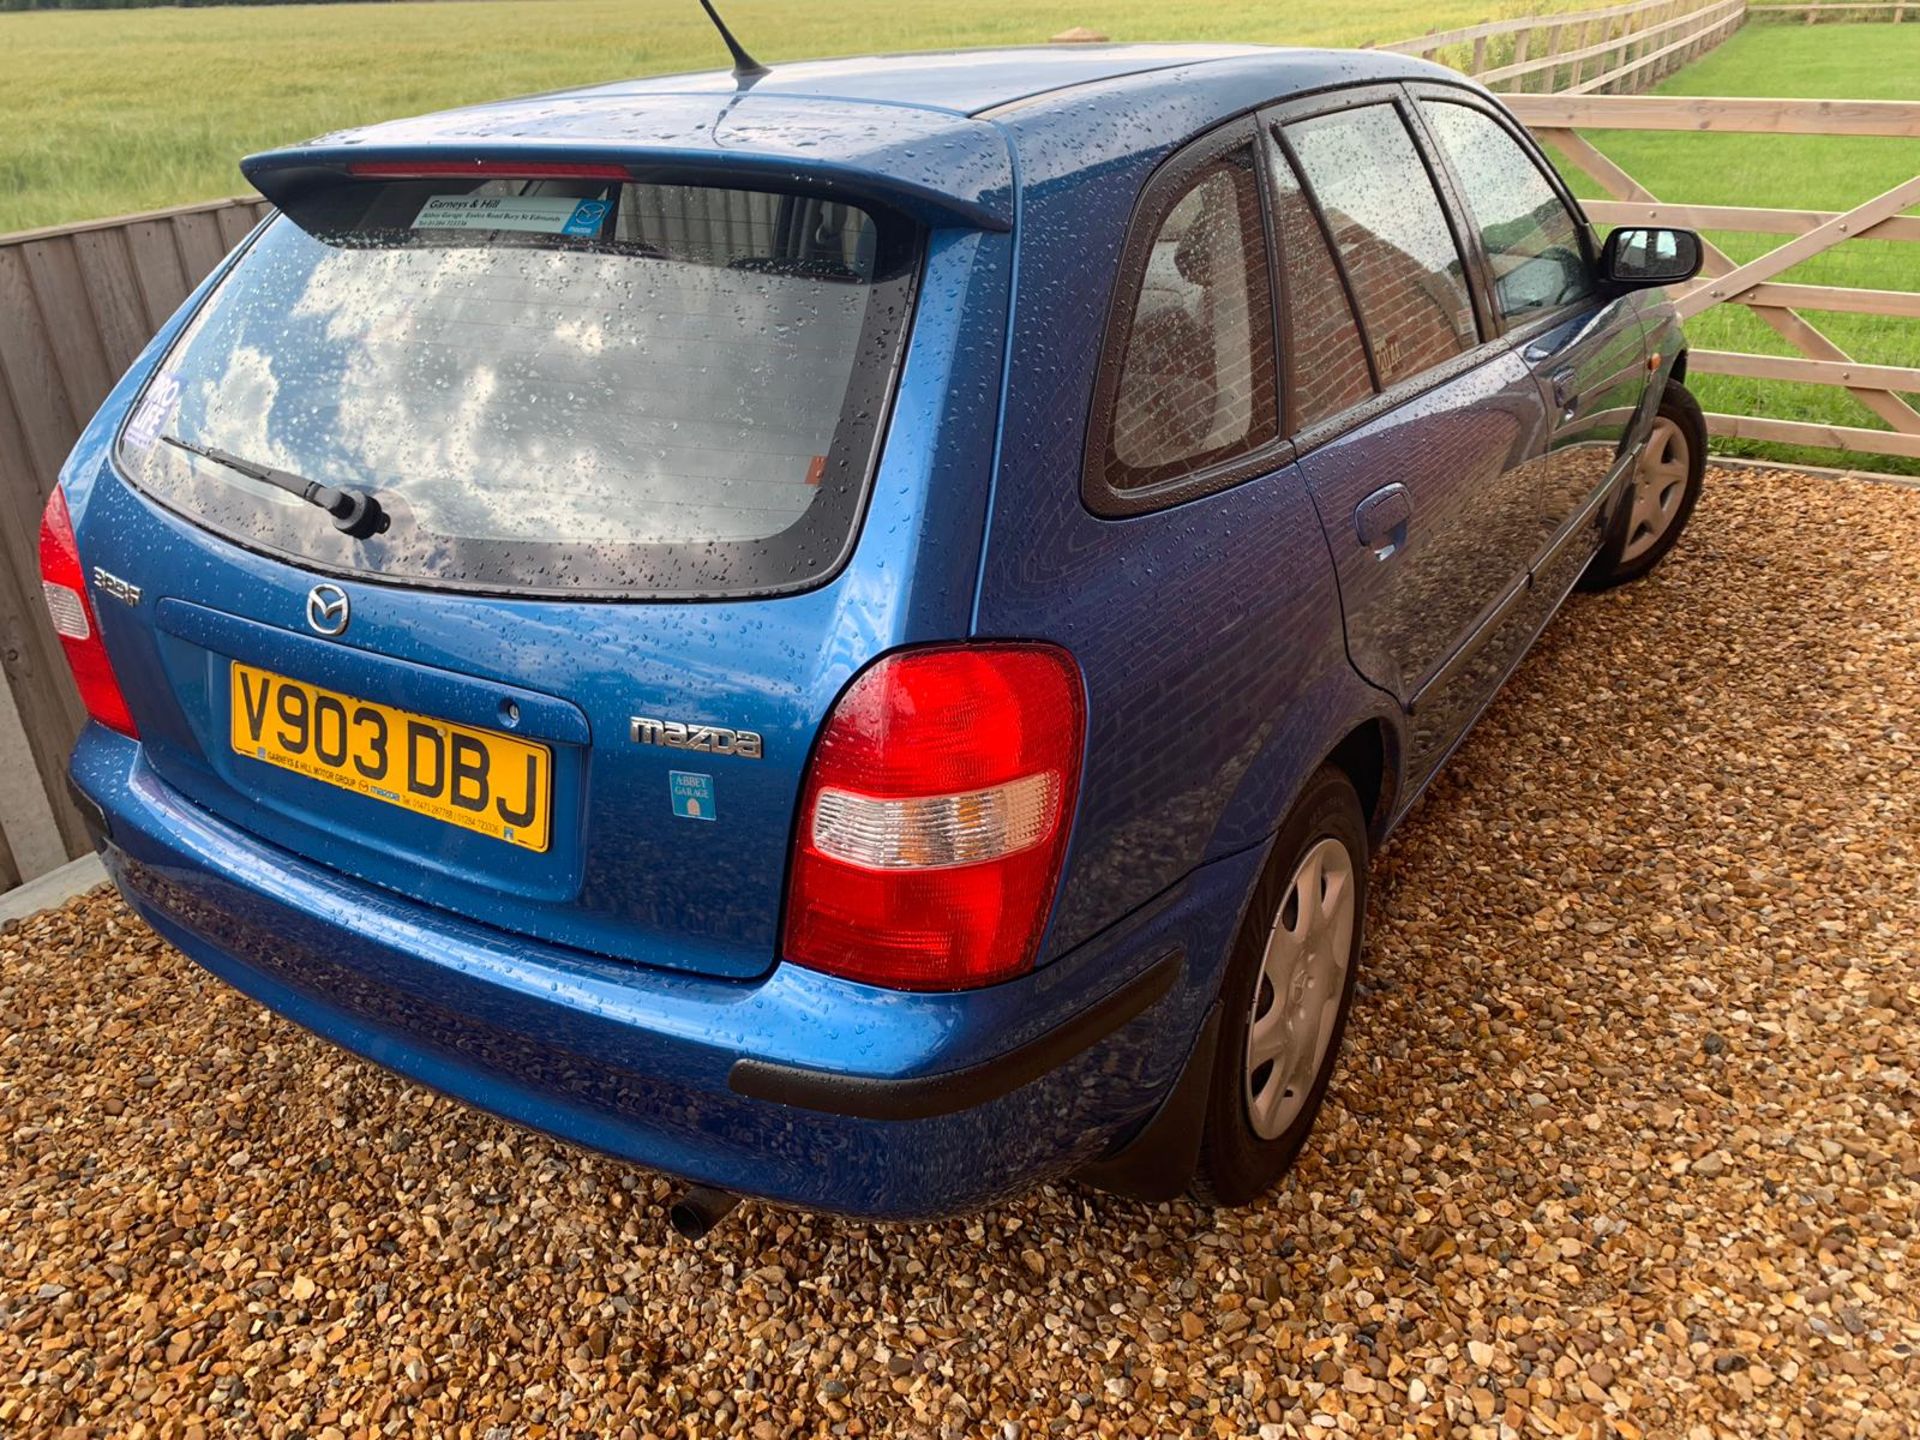 1999 MAZDA 323 GXI 1.5 PETROL 90 HP HATCHBACK, 1 OWNER FROM NEW, LAST SERVICE 38 MILES AGO *NO VAT* - Image 7 of 30